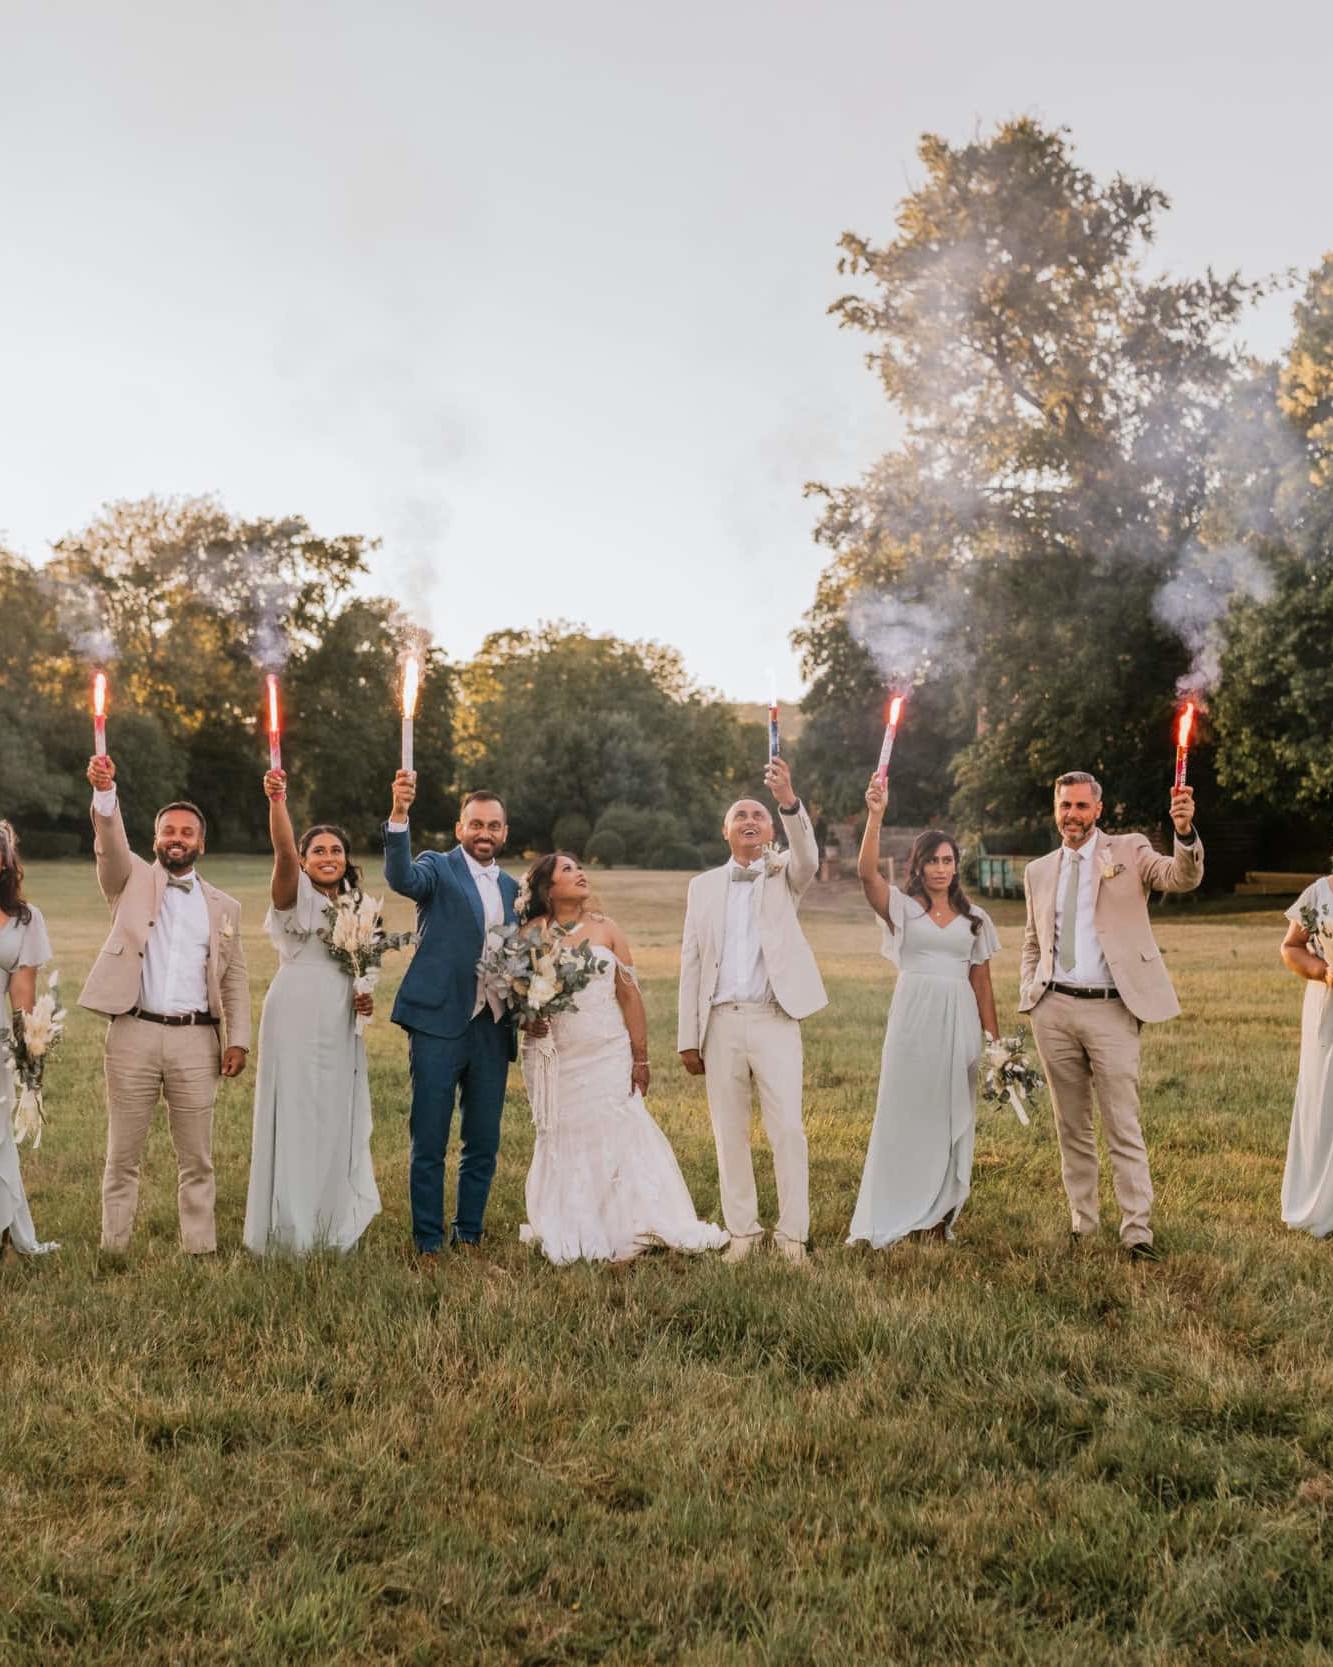 Groomsman, bridesmaids and couple walking towards the camera with sparklers in their hand